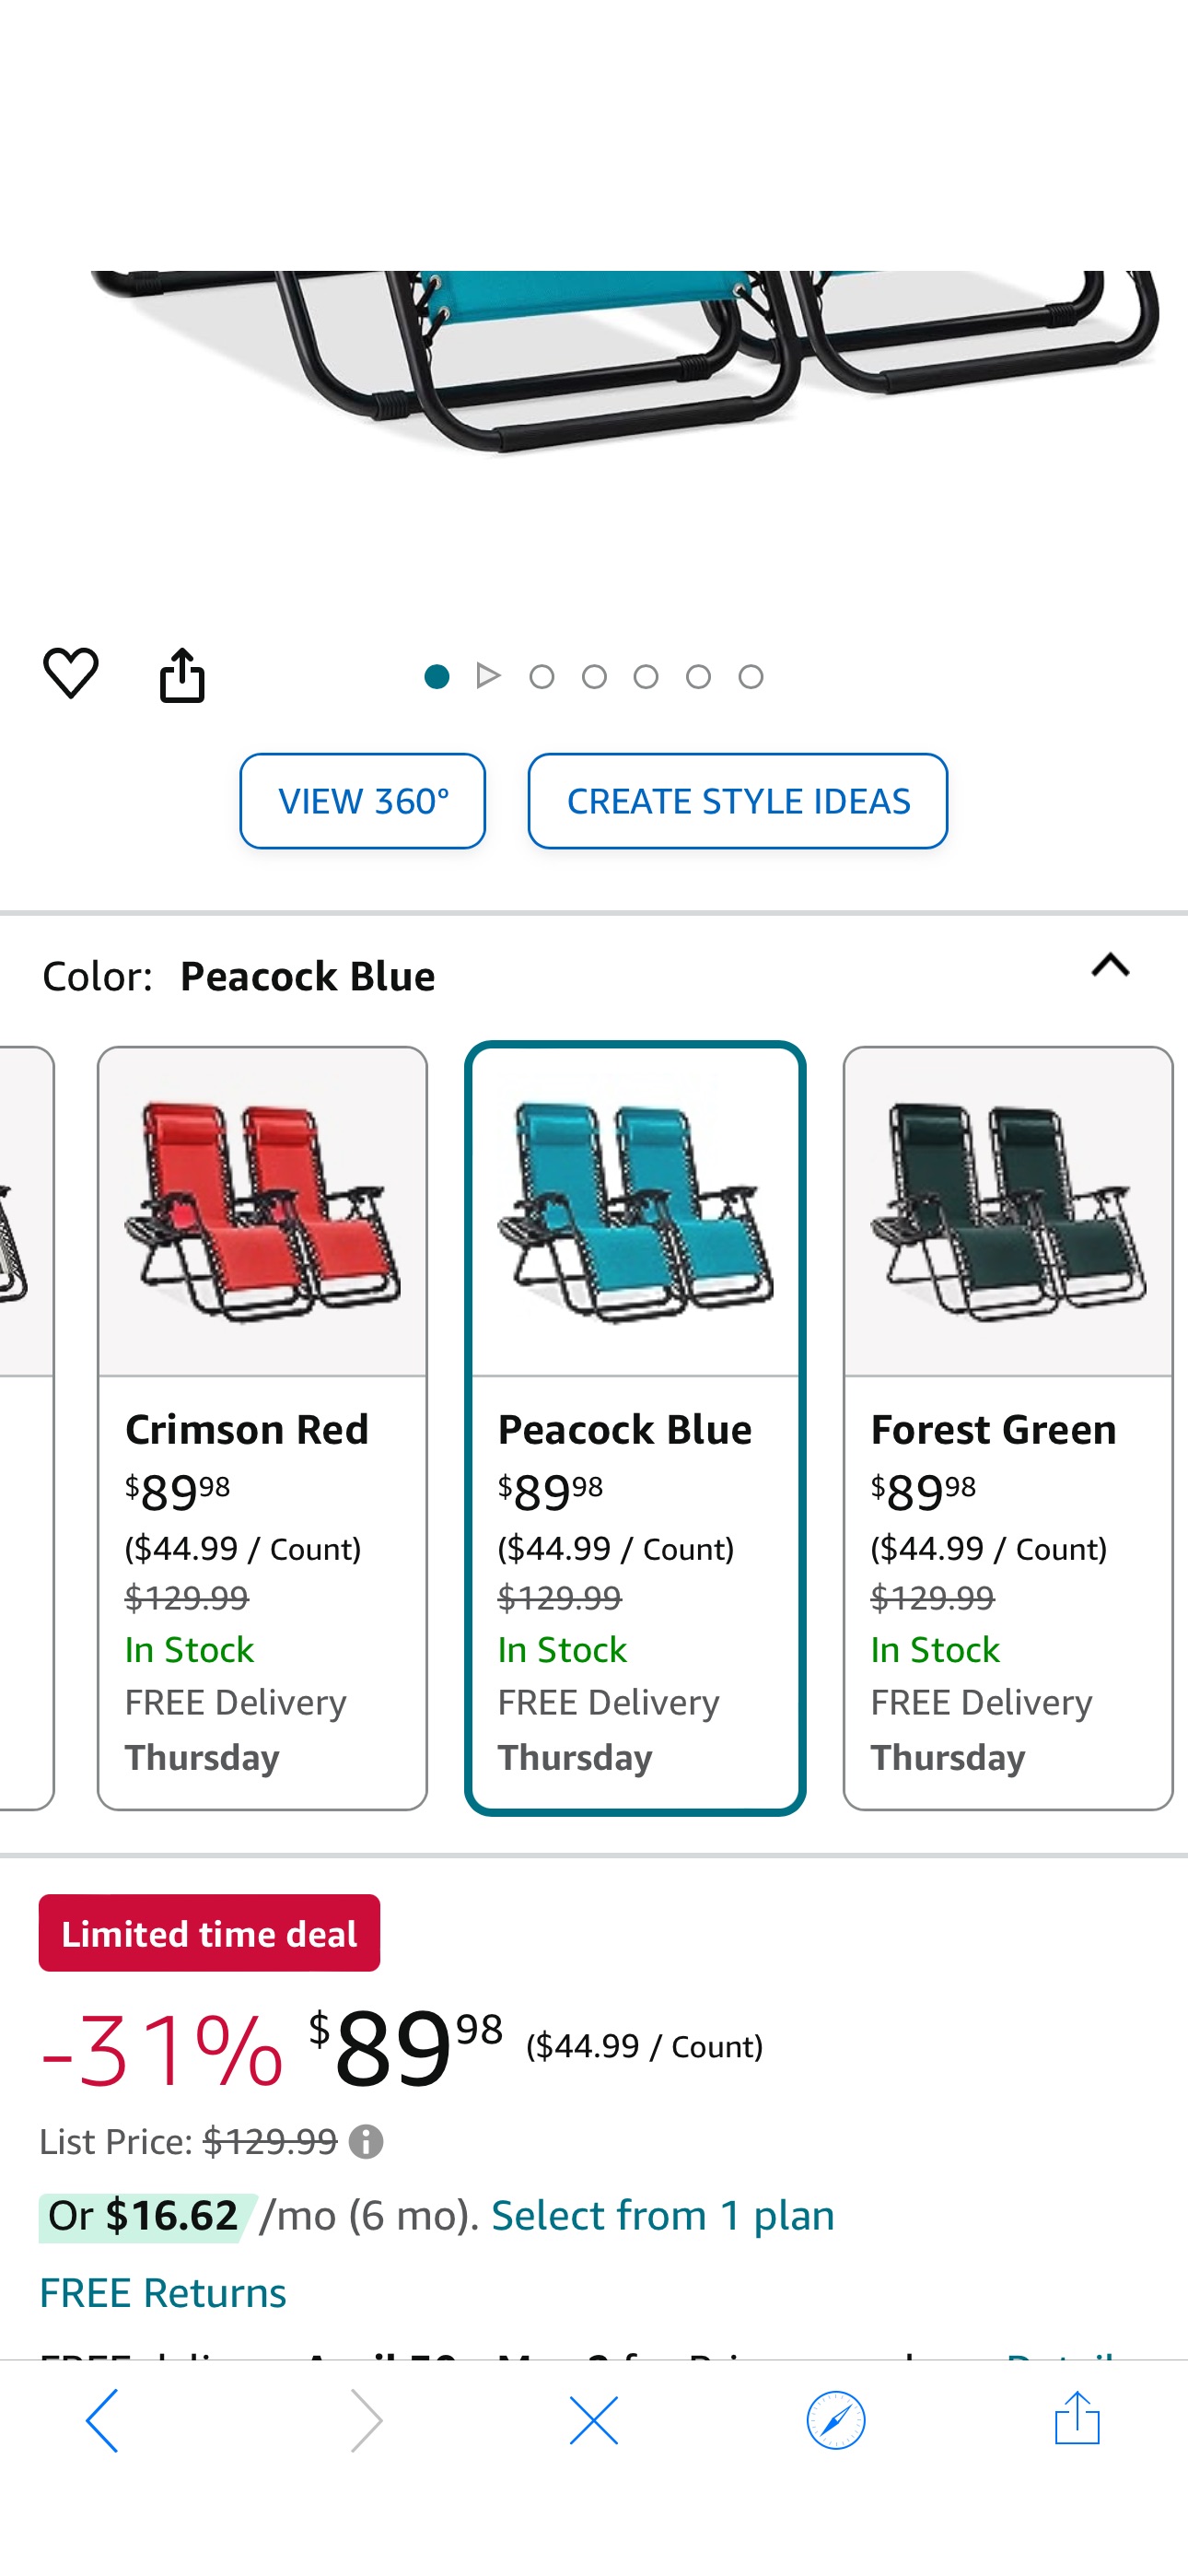 Amazon.com : Best Choice Products Set of 2 Adjustable Steel Mesh Zero Gravity Lounge Chair Recliners w/Pillows and Cup Holder Trays - Peacock Blue : Patio, Lawn & Garden